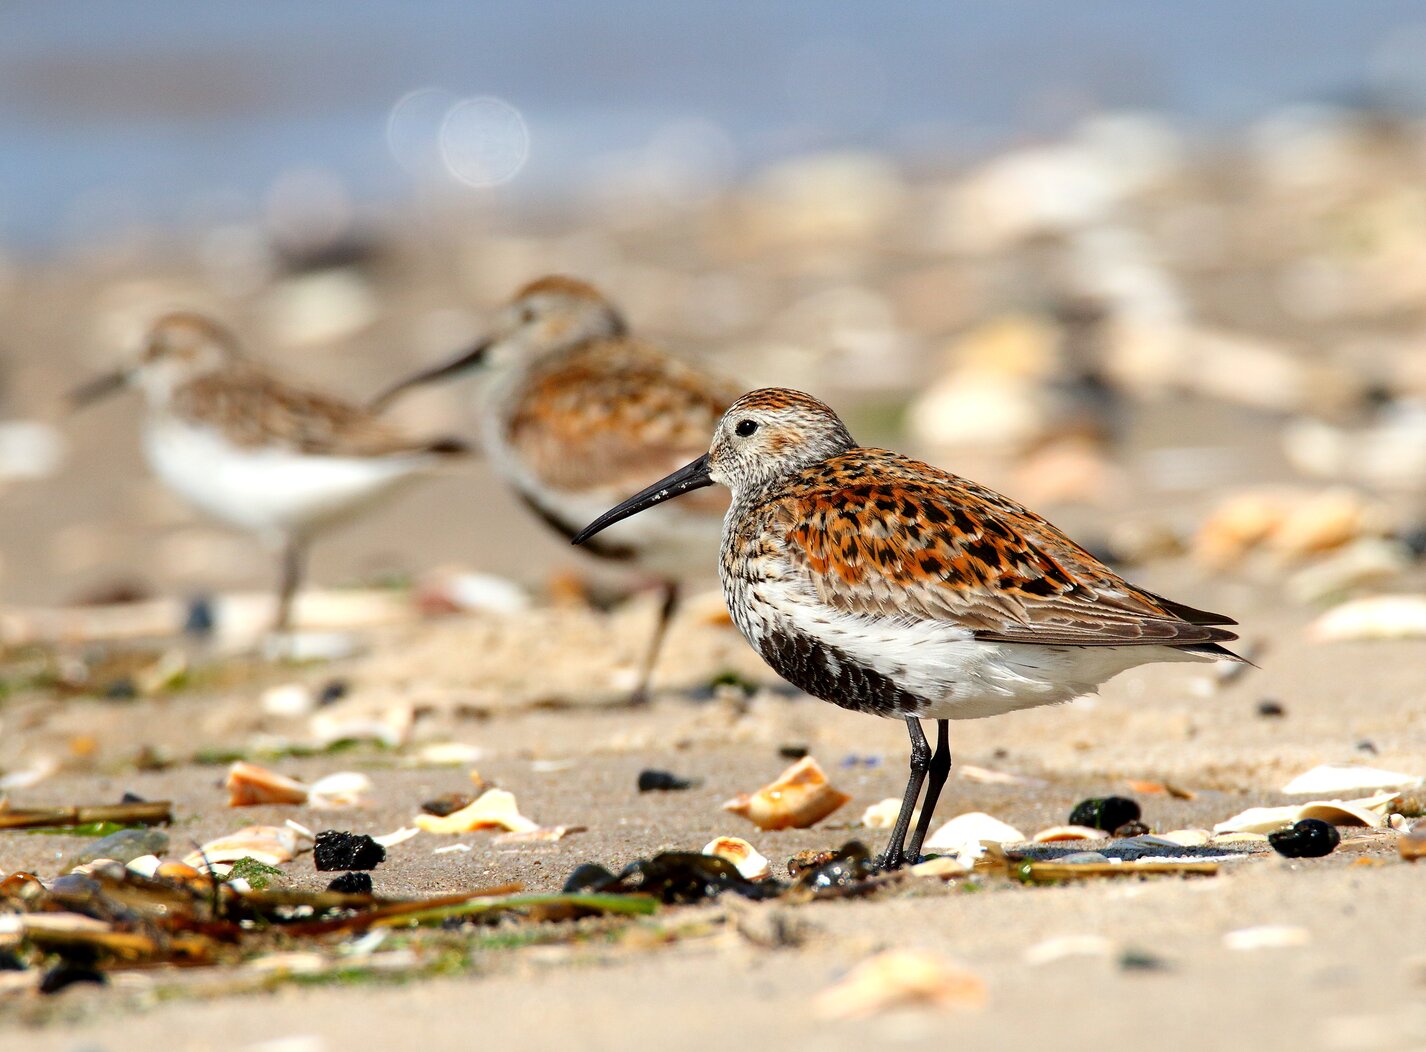 Dunlin are among the many shorebird species that stop by Plumb Beach during migration. Photo: Isaac Grant